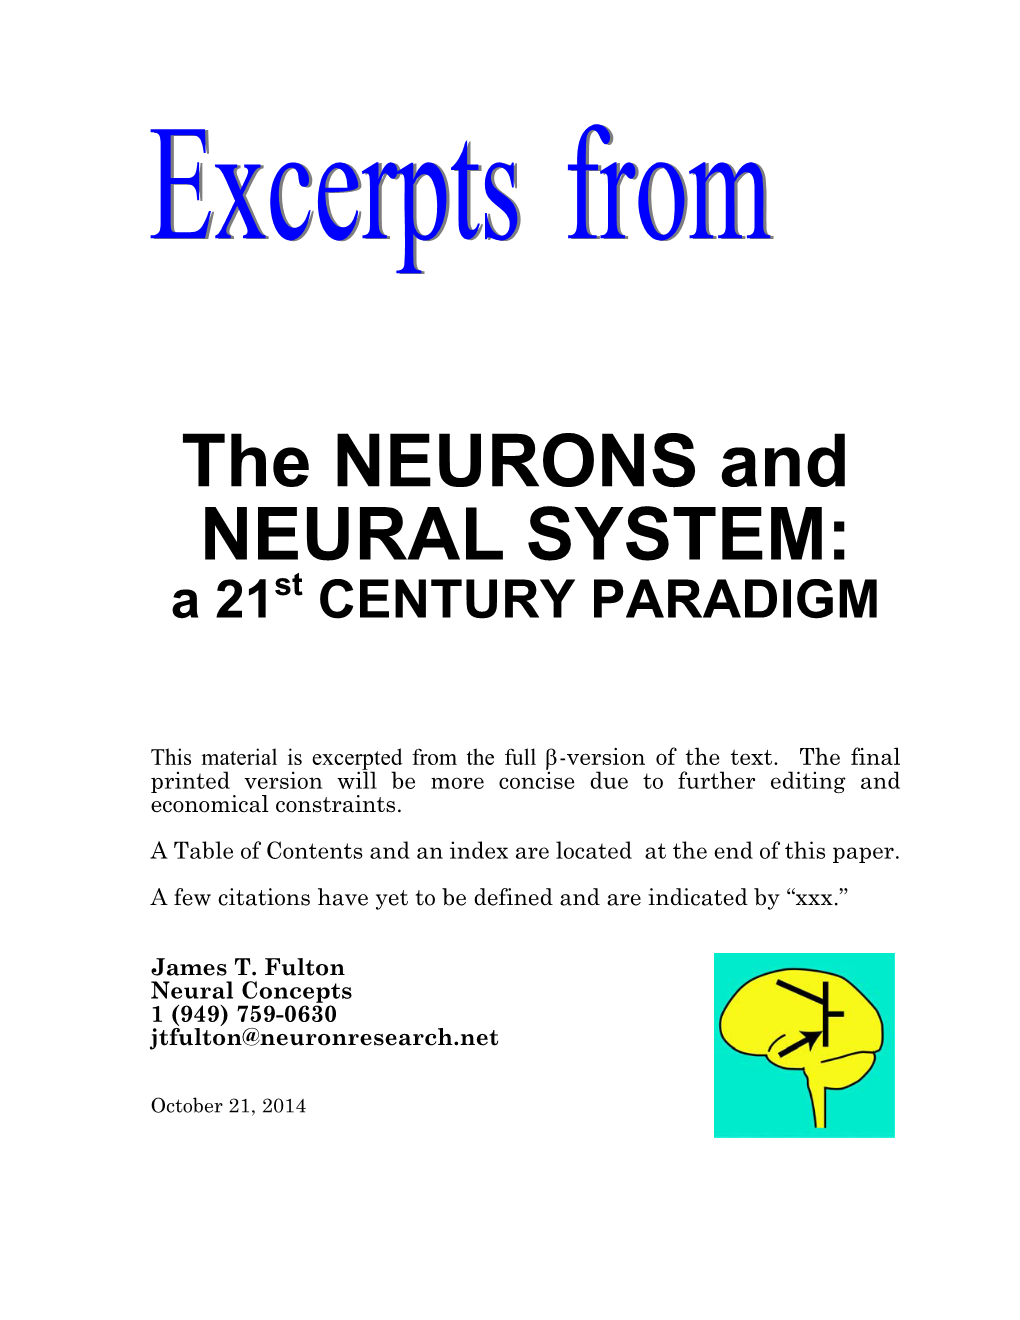 The NEURONS and NEURAL SYSTEM: a 21 St CENTURY